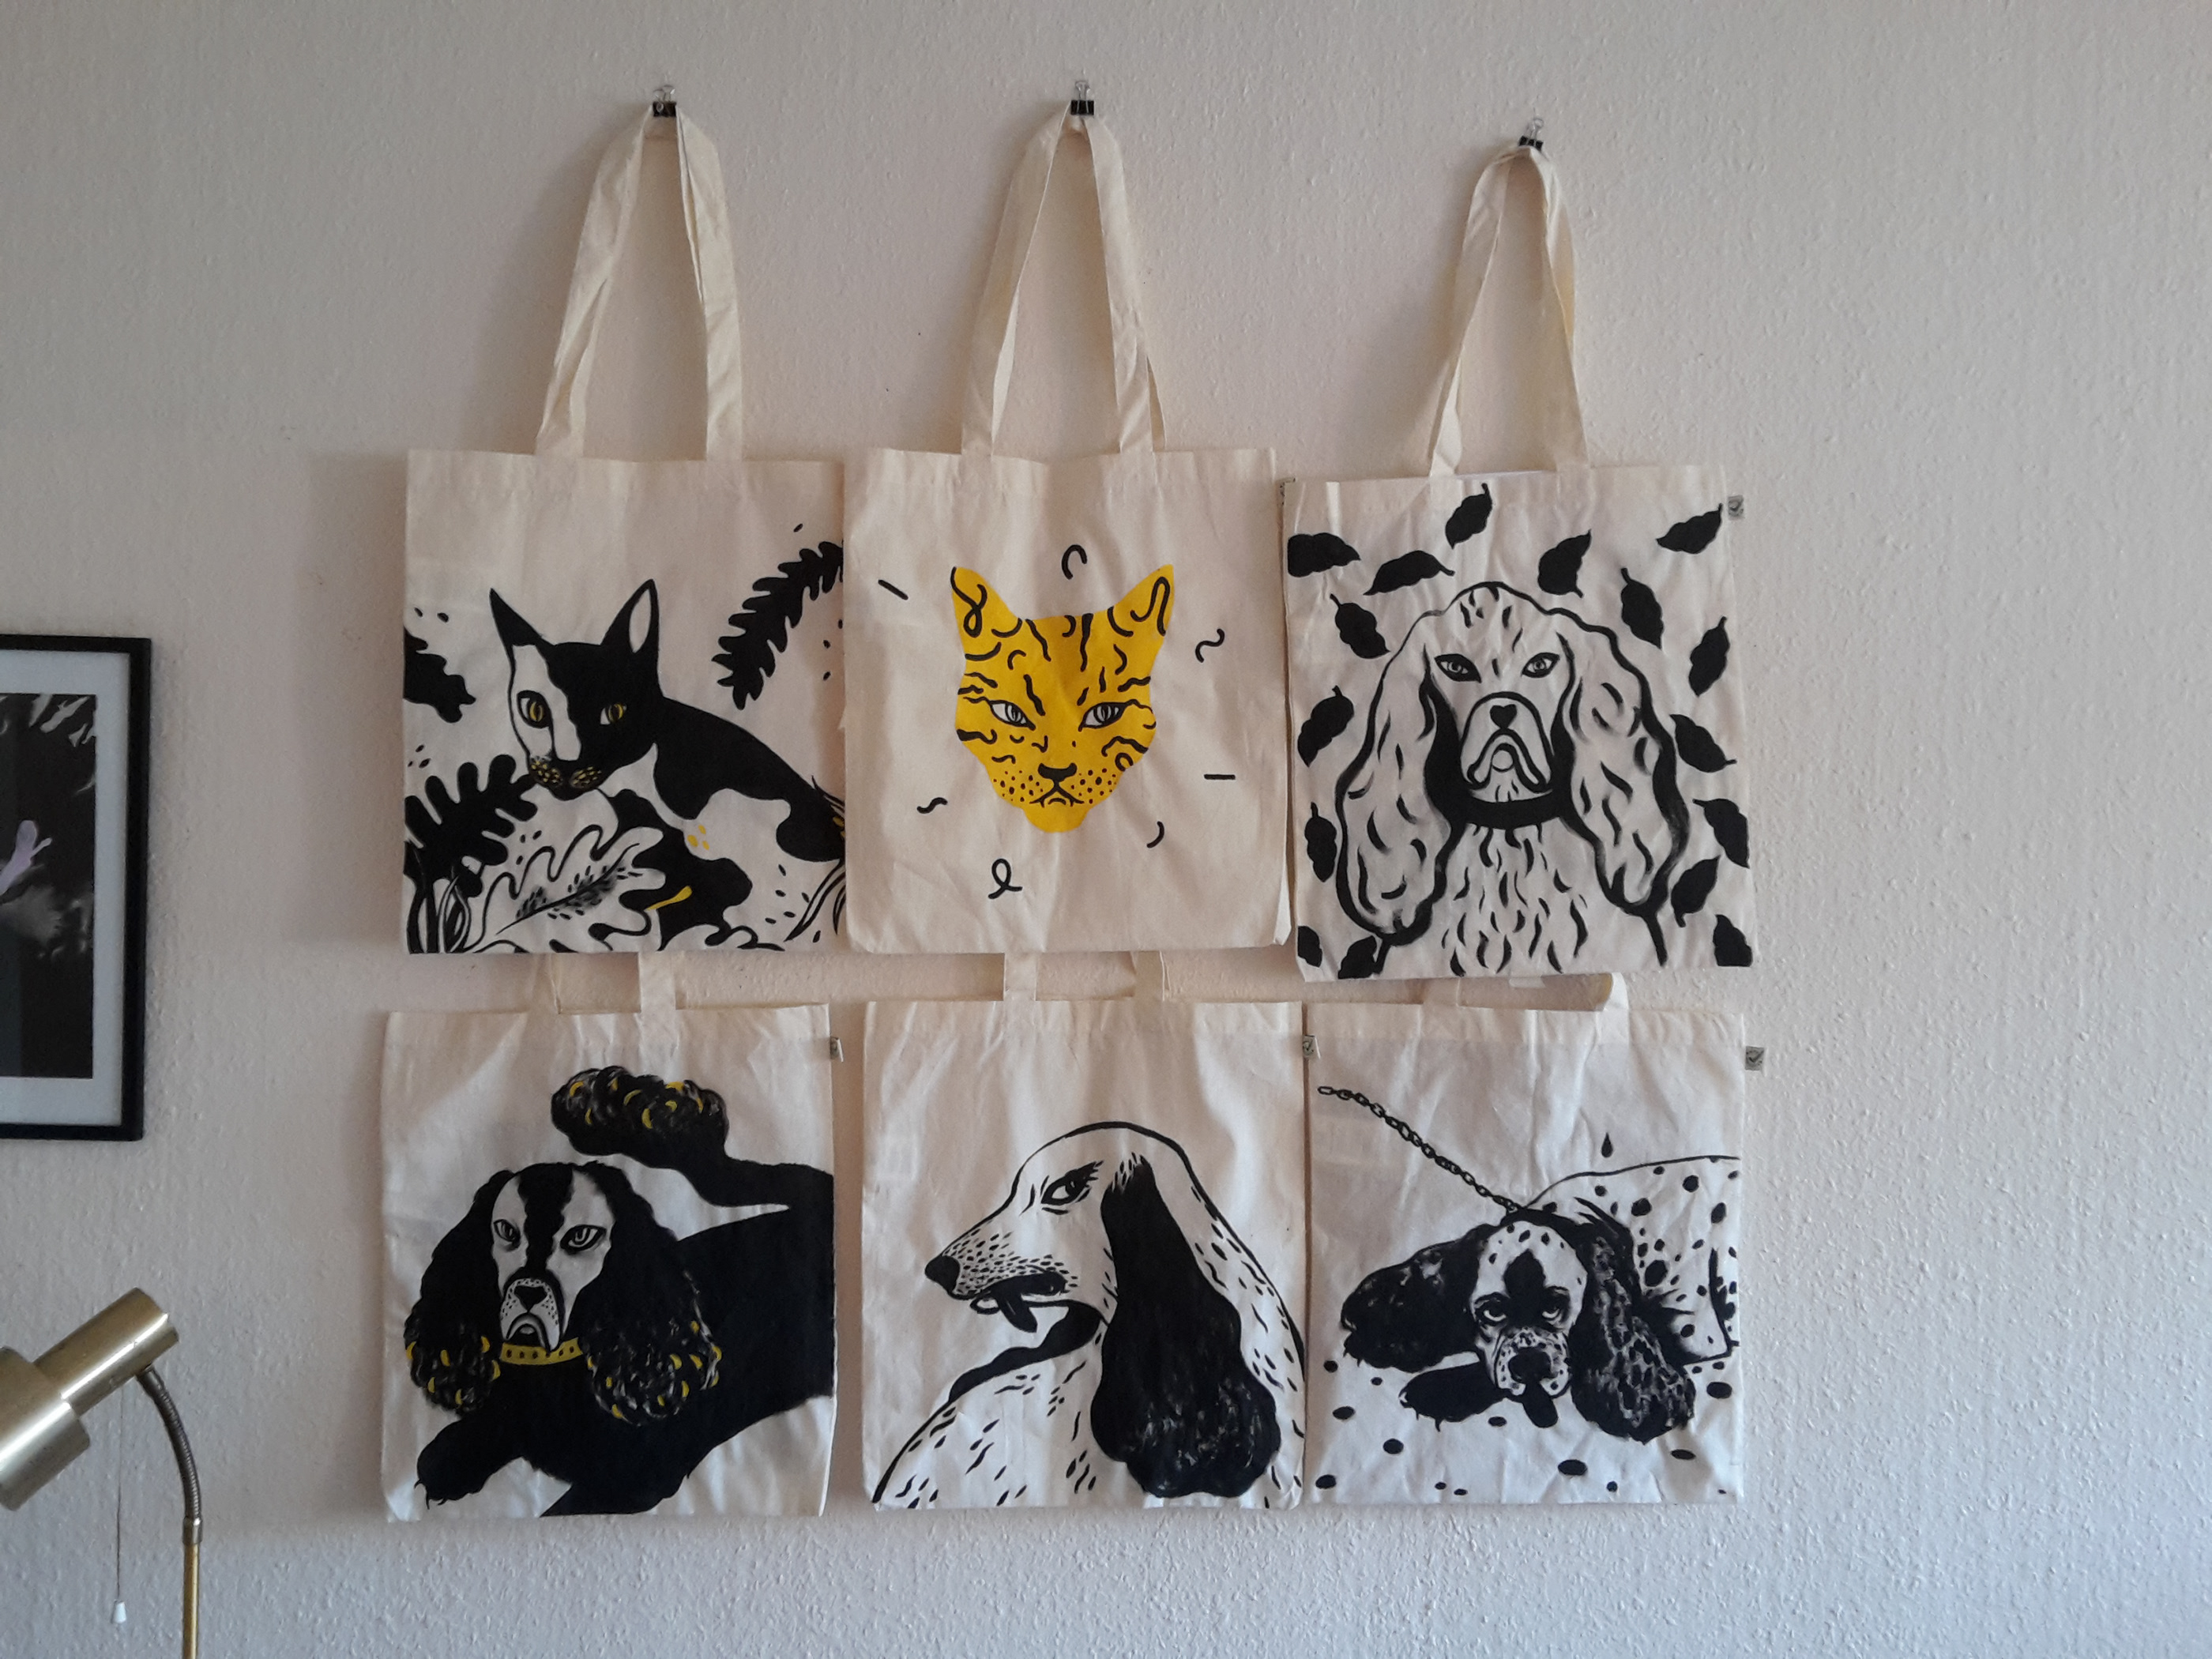 Hand painted bags on Behance